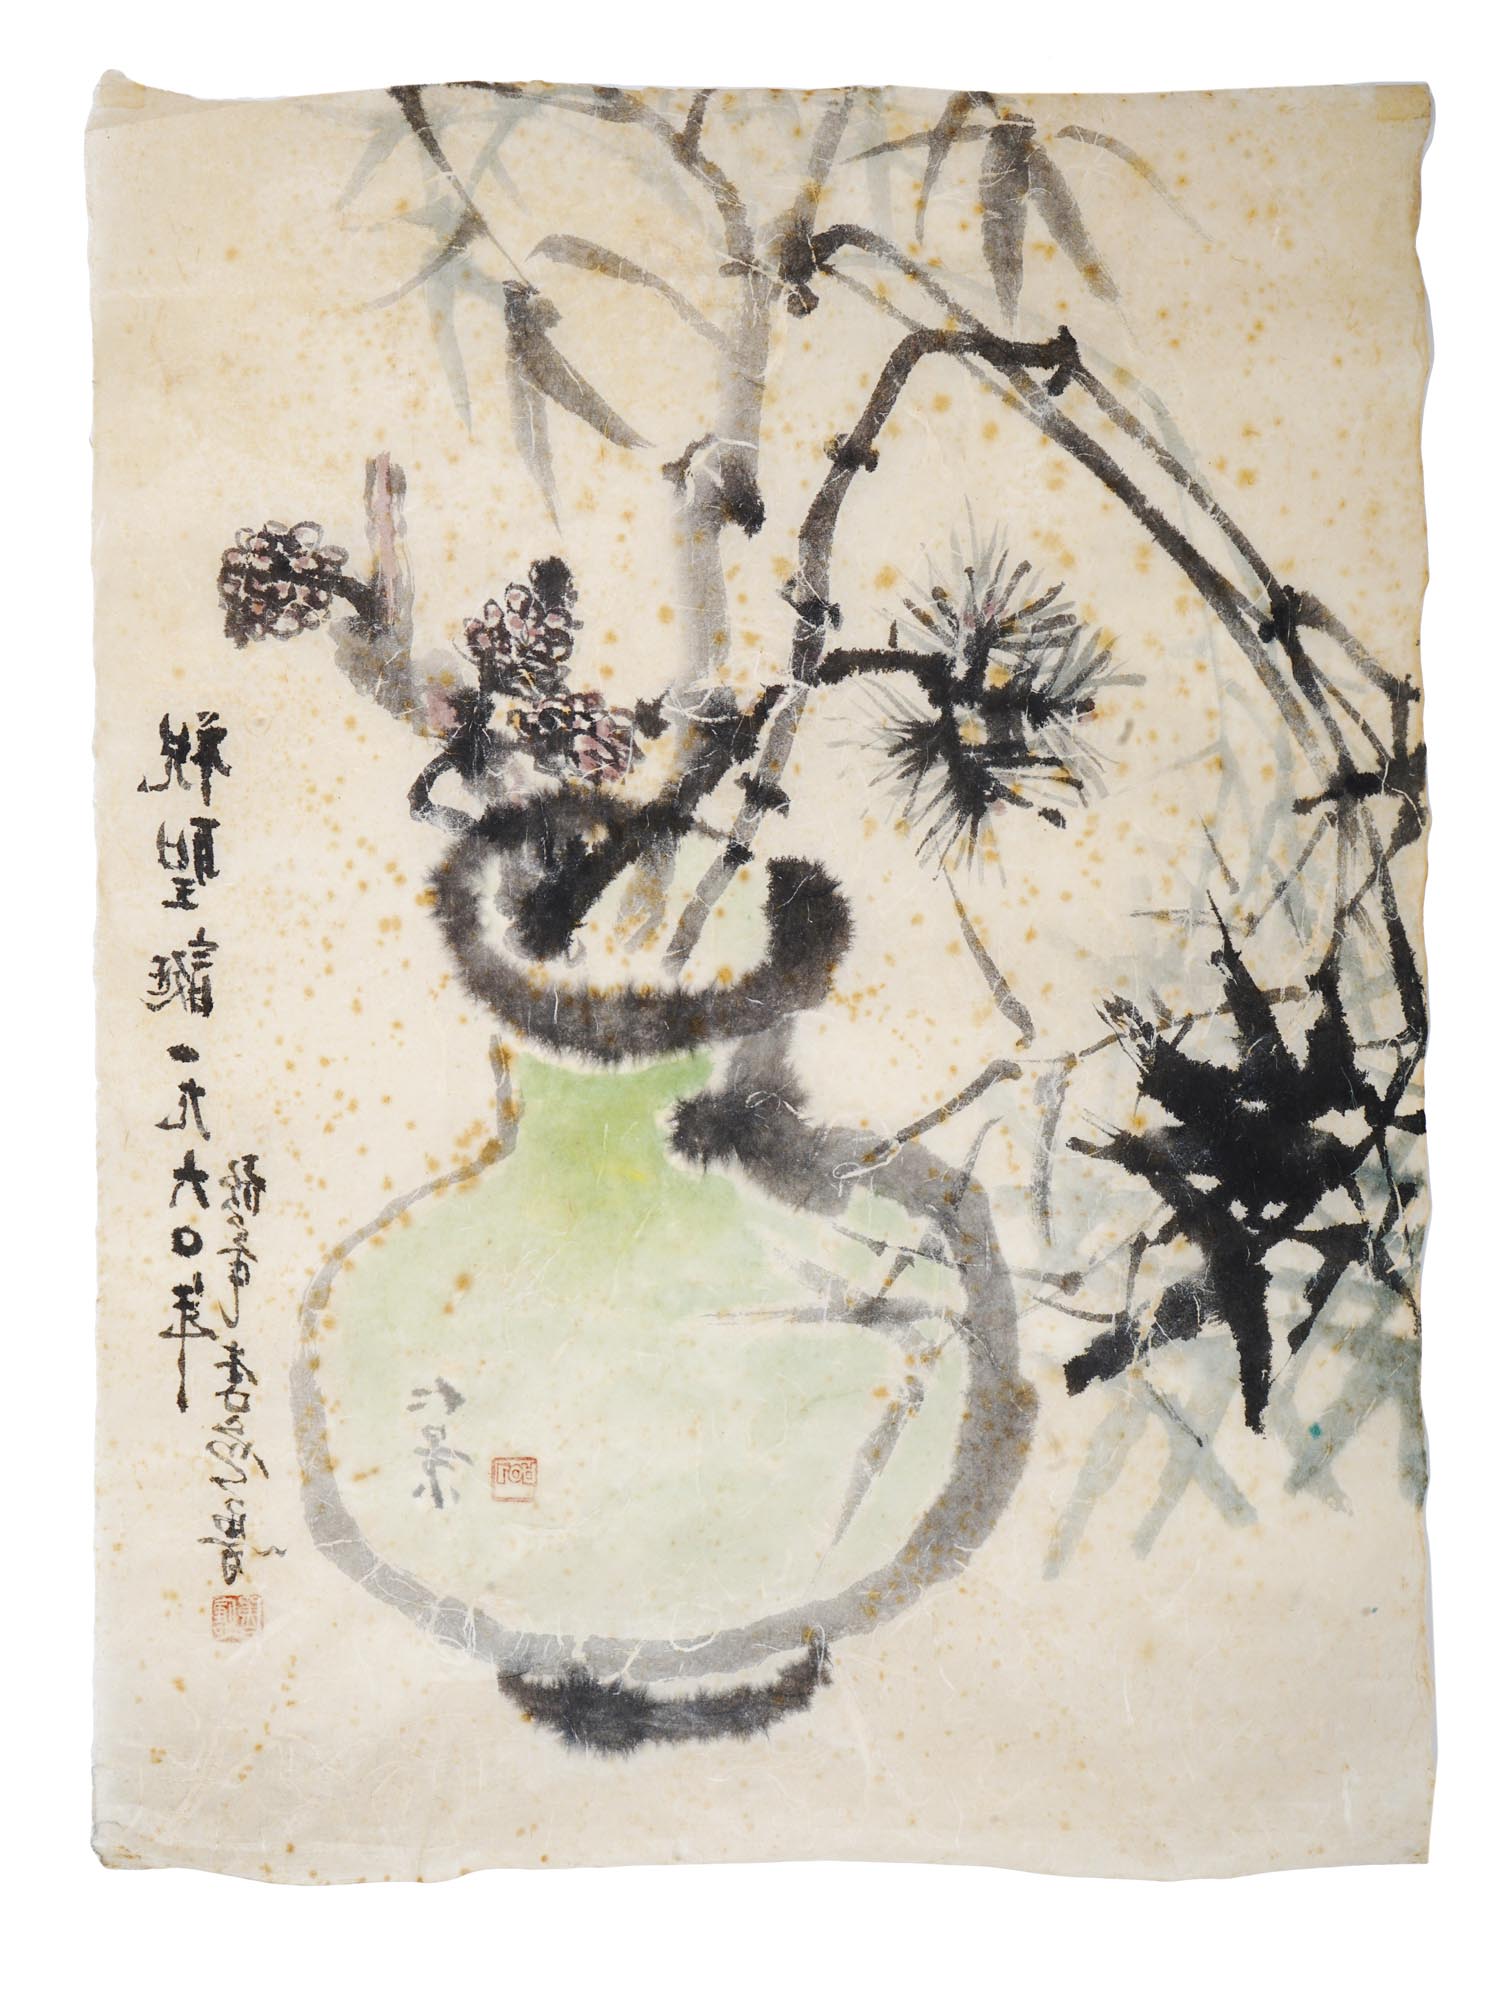 SIGNED CHINESE WATERCOLOR AND INK SCROLL PAINTING PIC-4